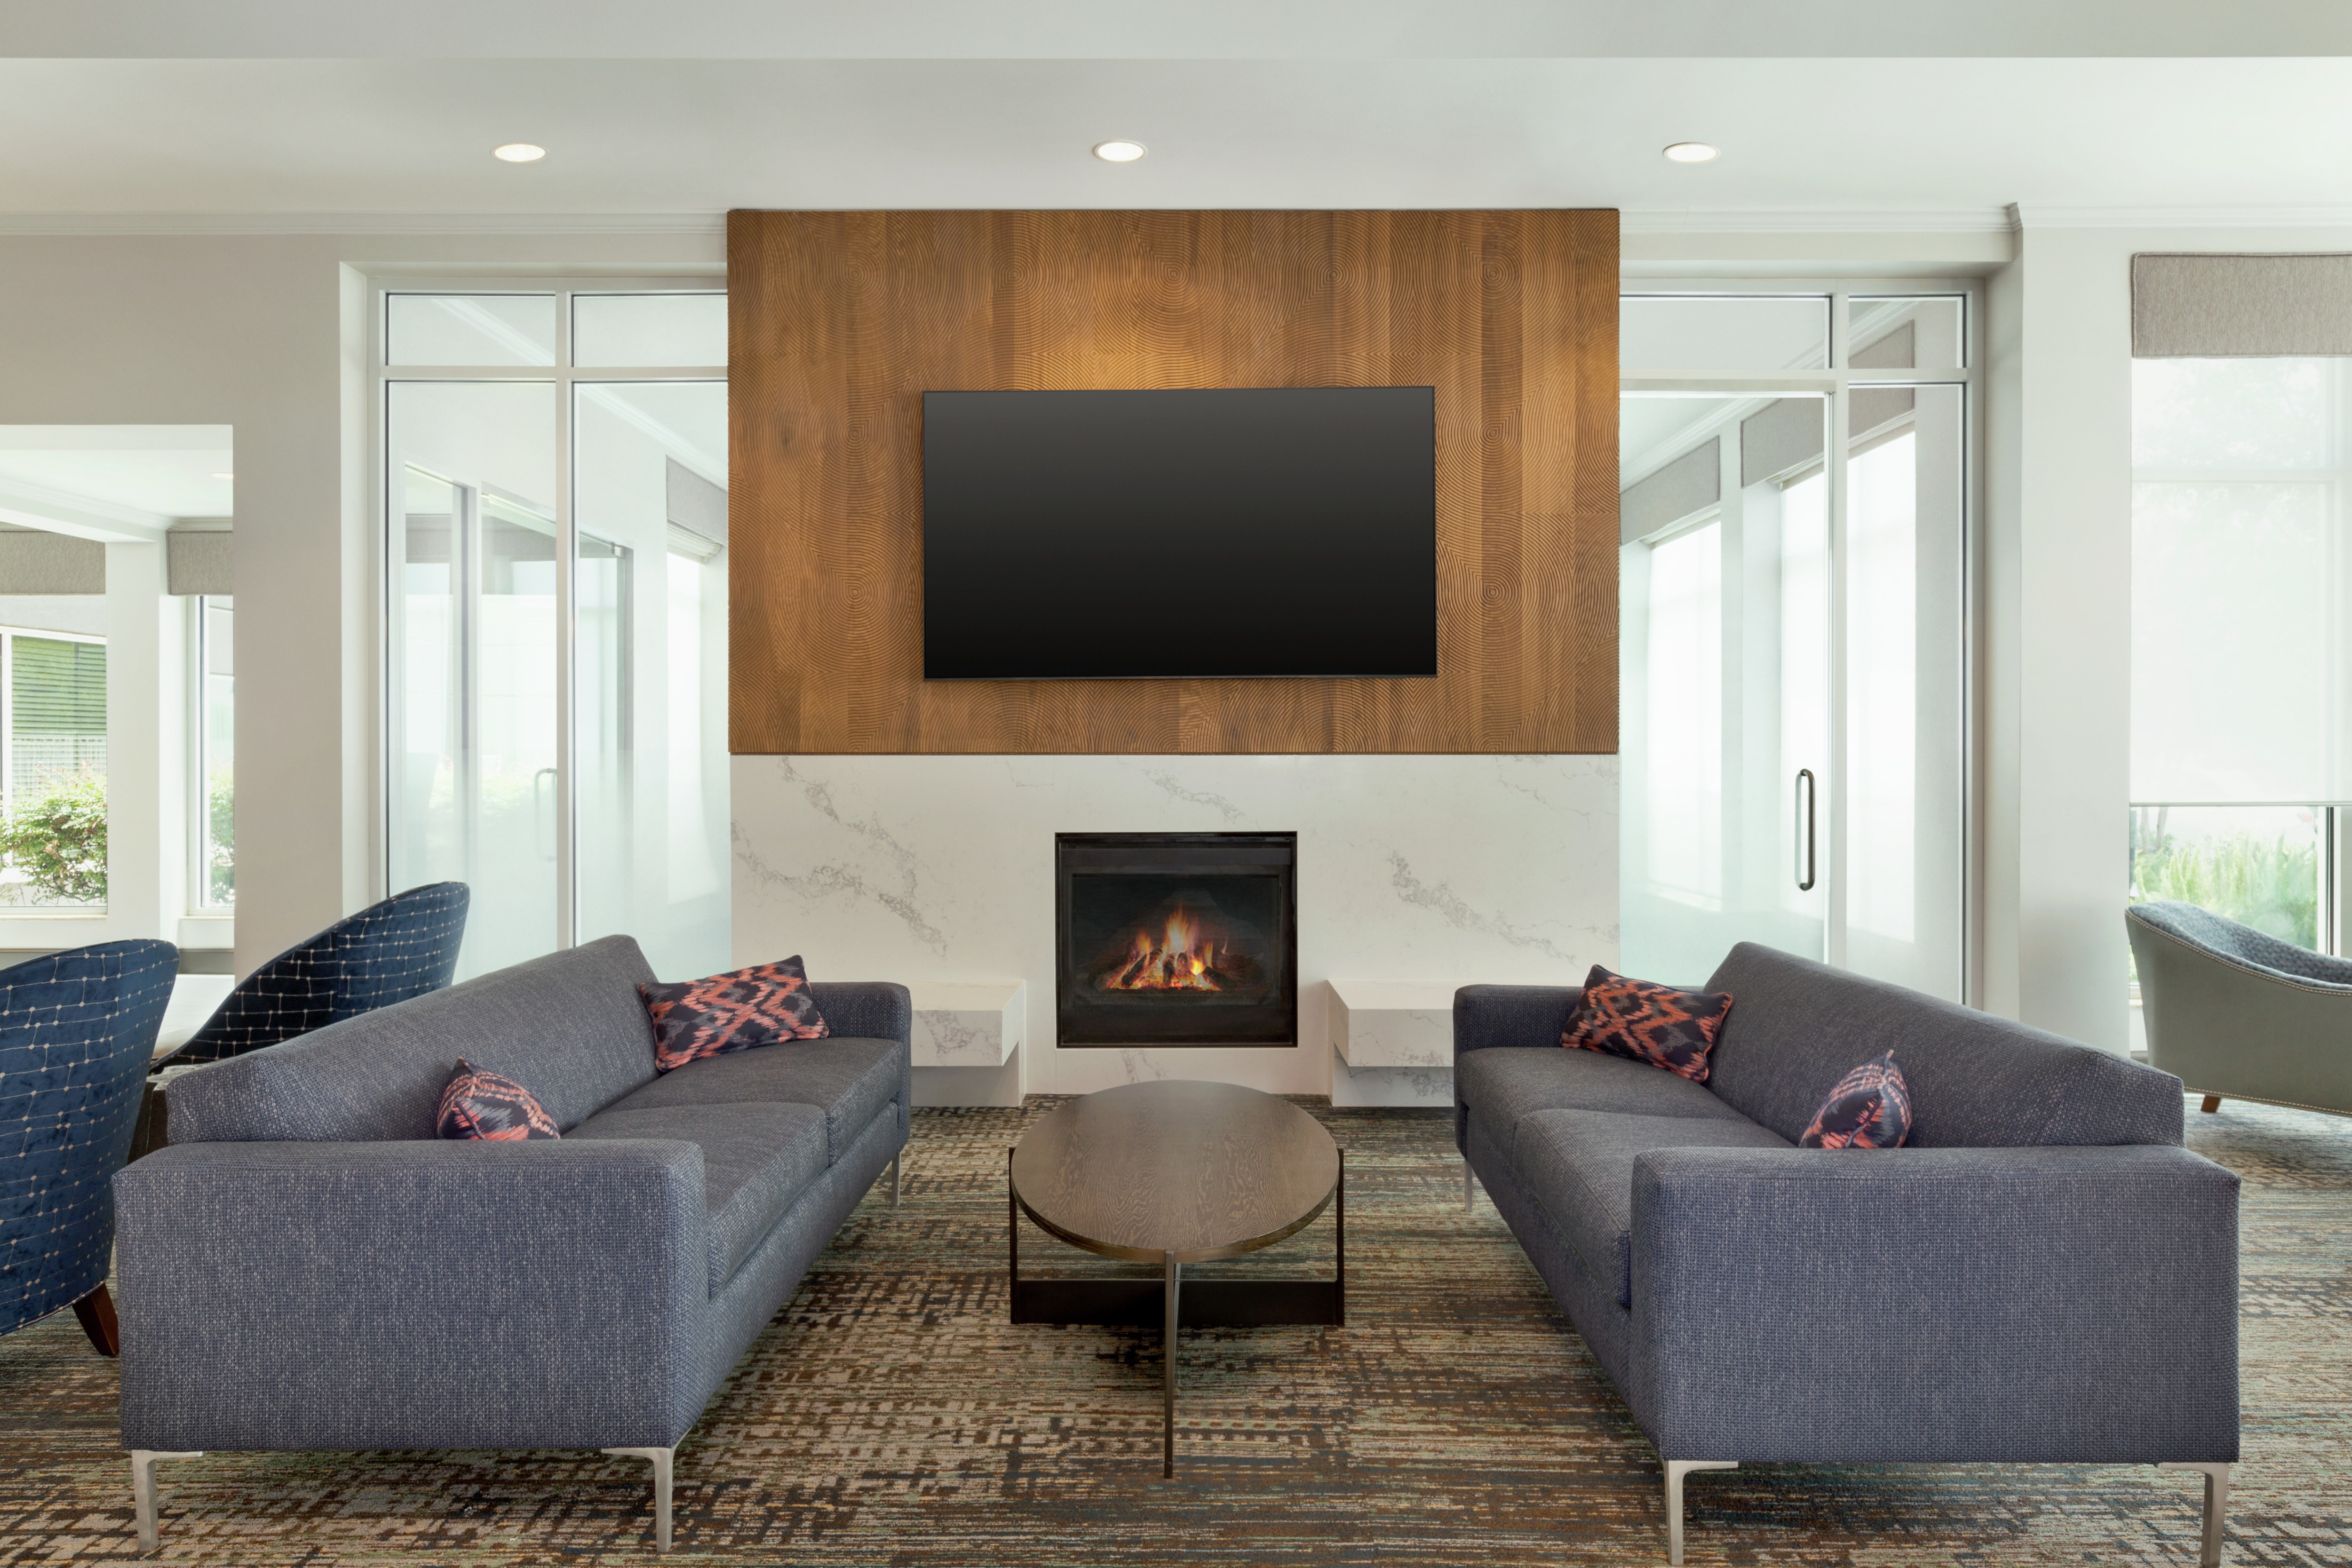 Comfortable lounge area in lobby featuring ample seating, fireplace, and TV.